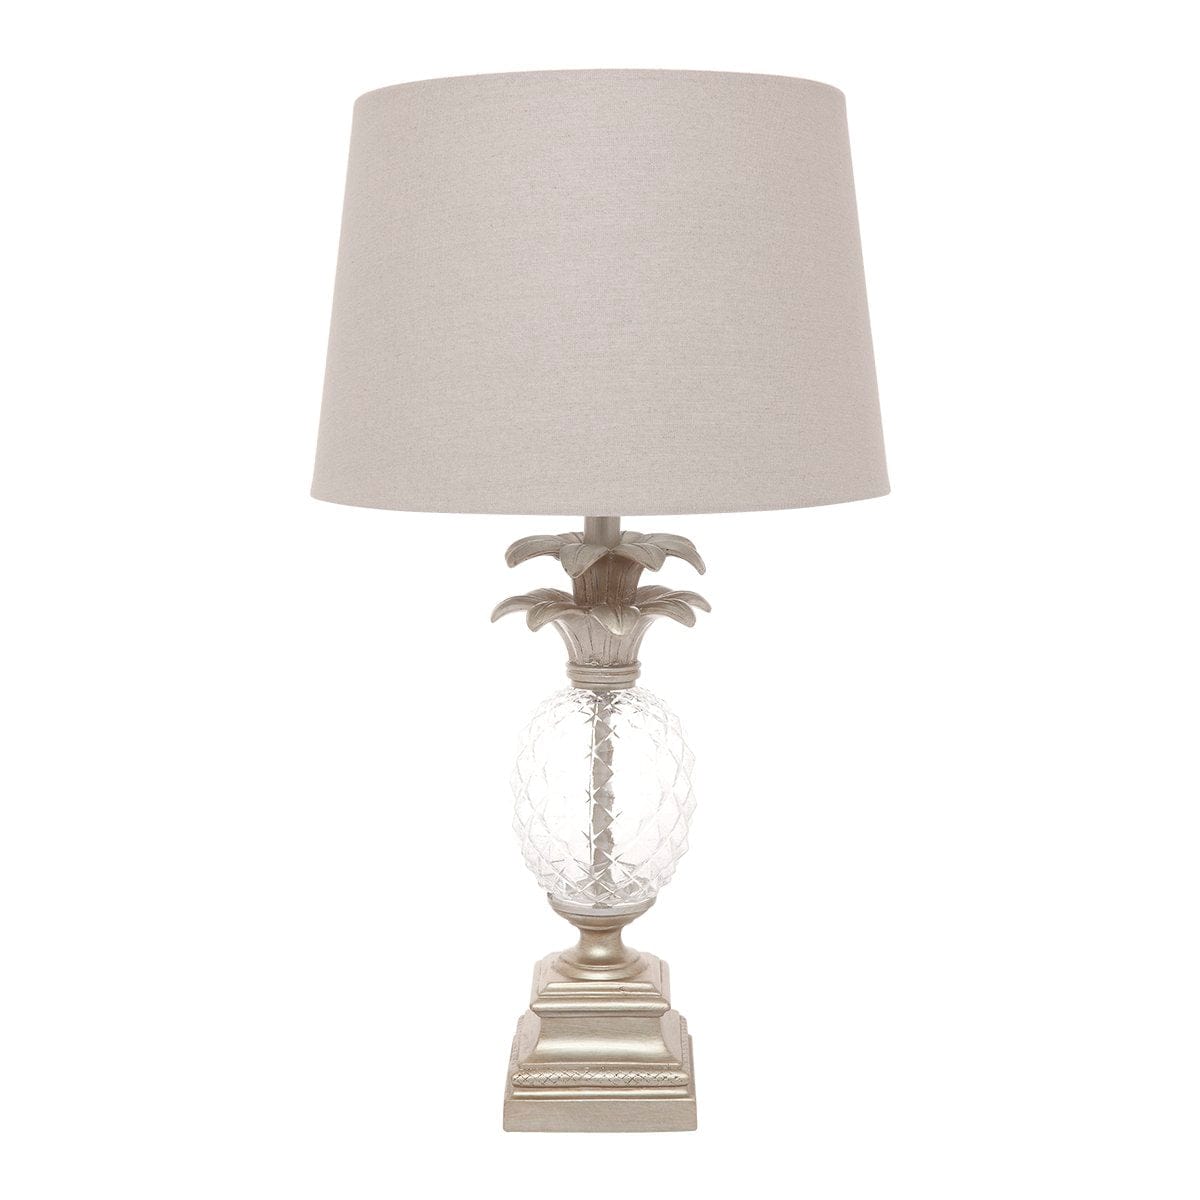 CAFE LIGHTING & LIVING Table Lamp Langley Table Lamp - Antique Silver 11628